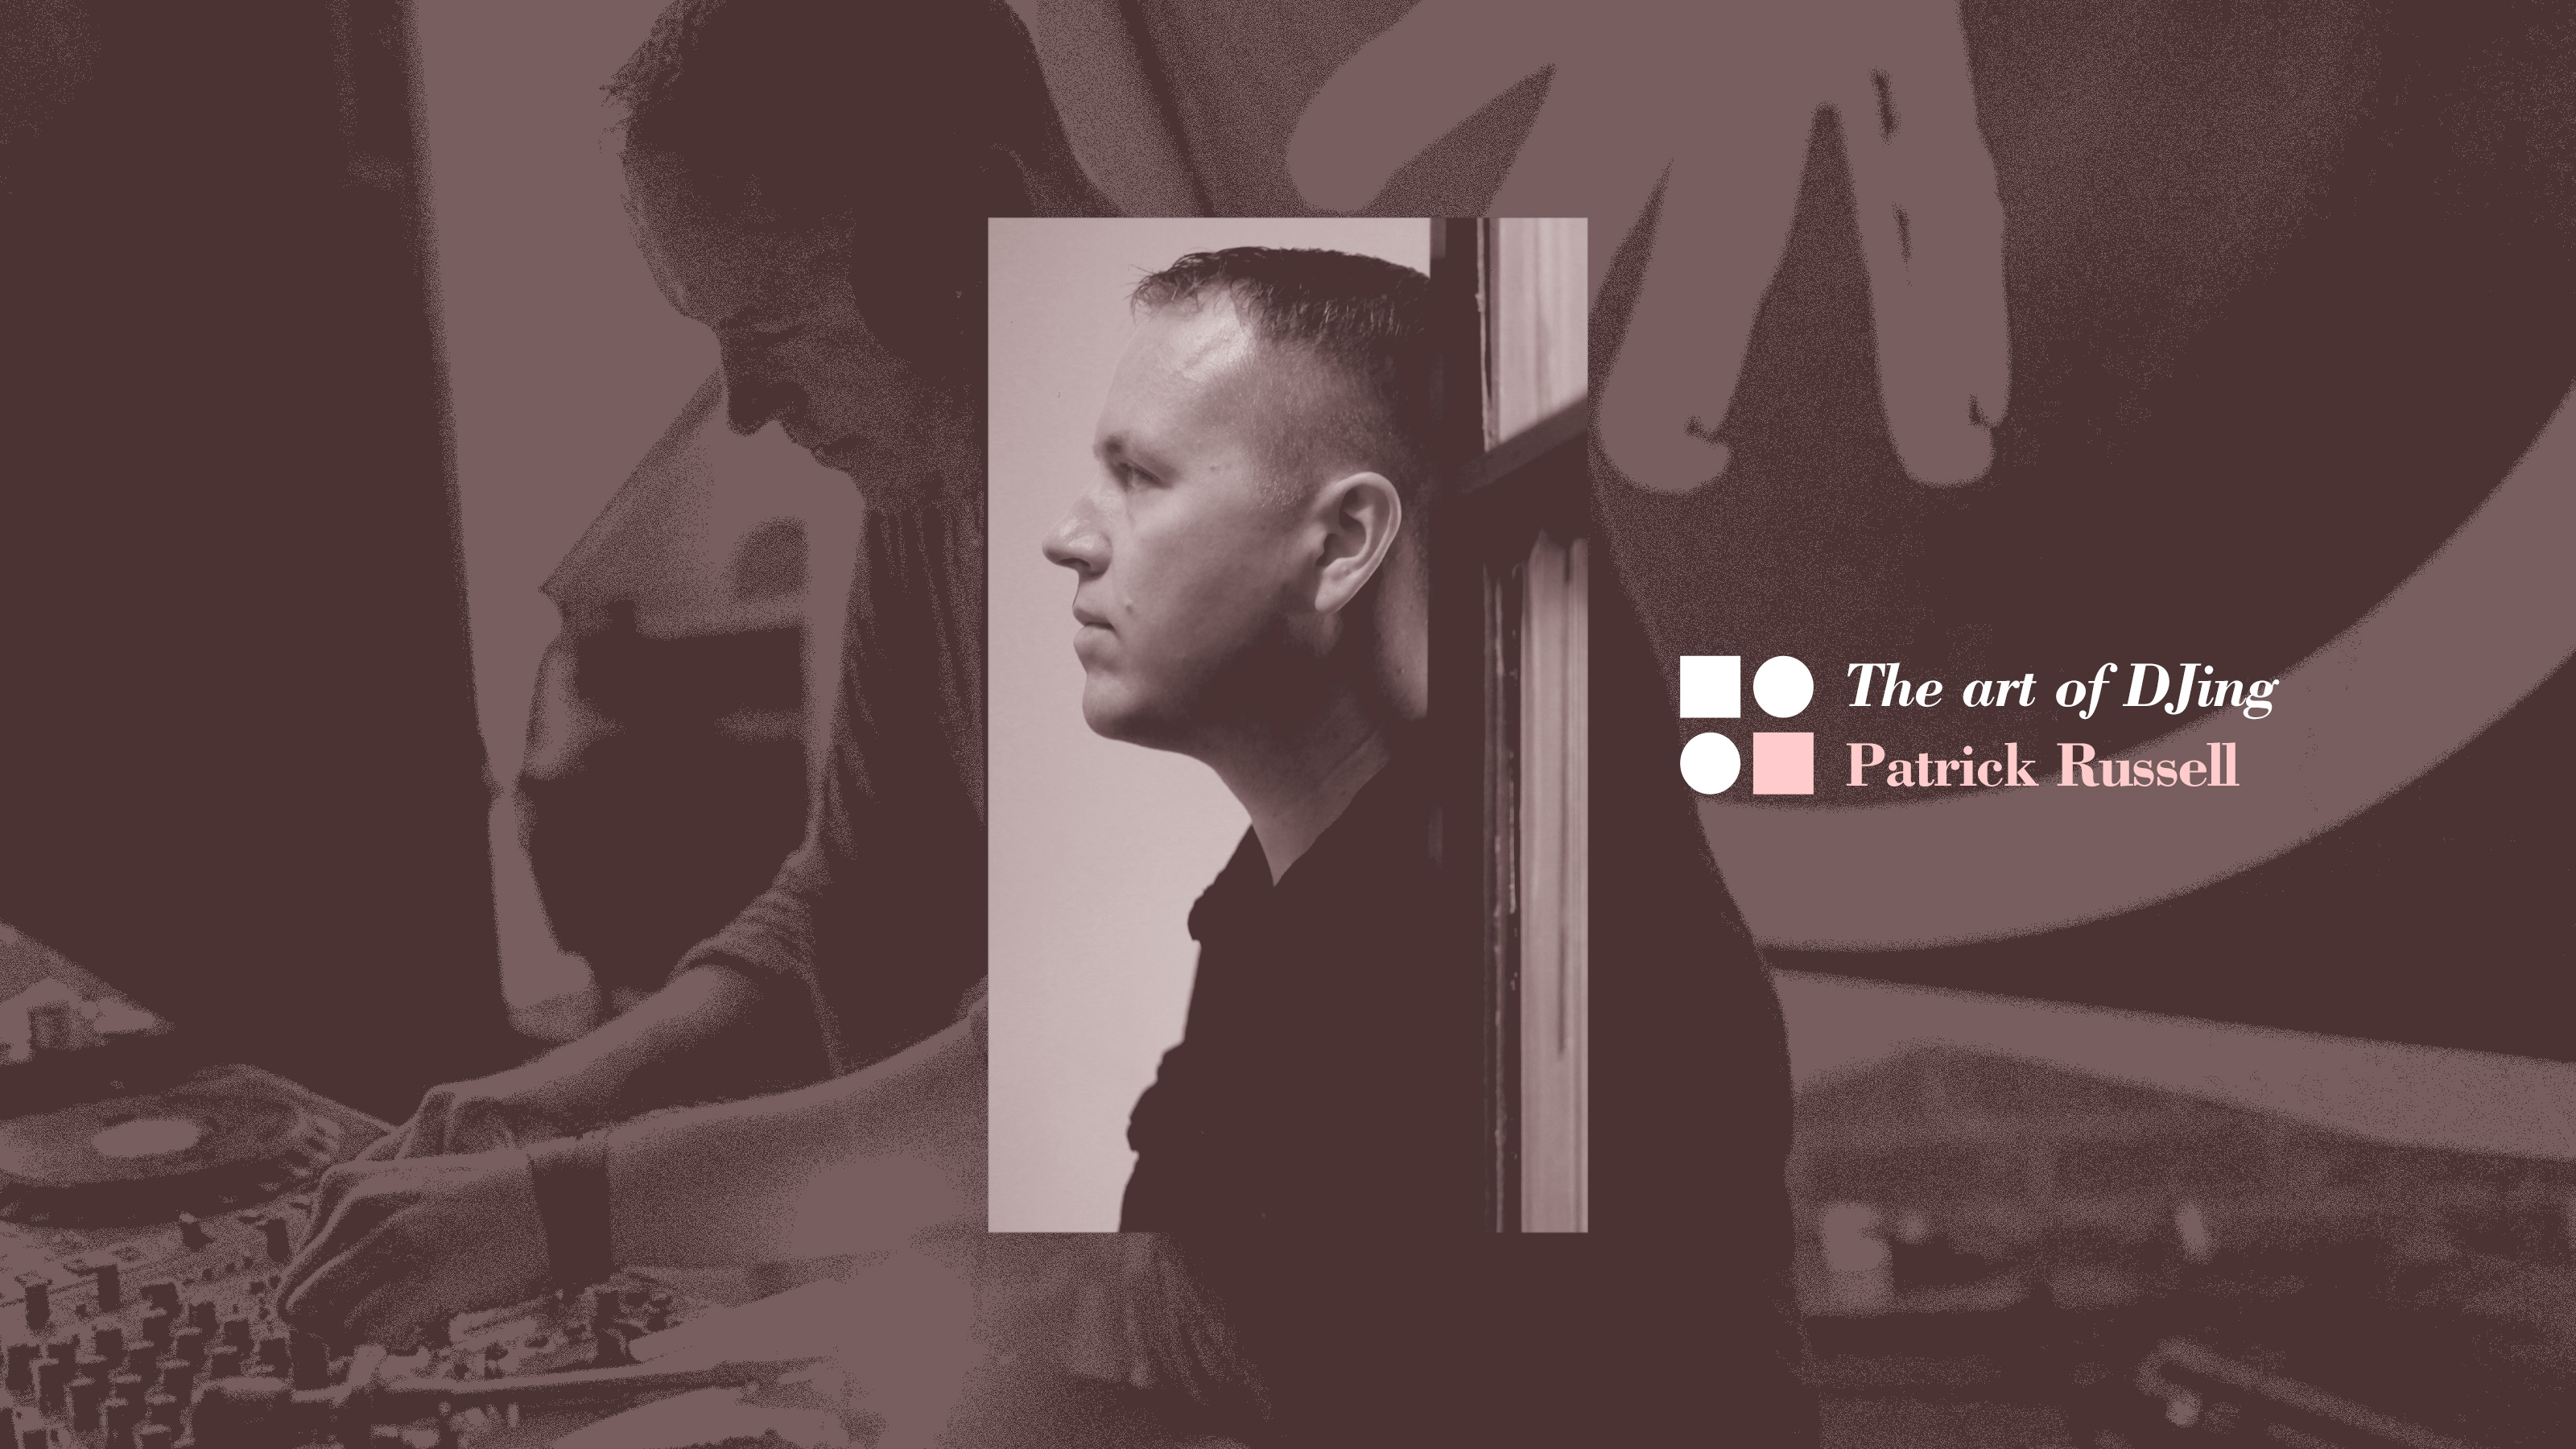 The art of DJing: Patrick Russell 